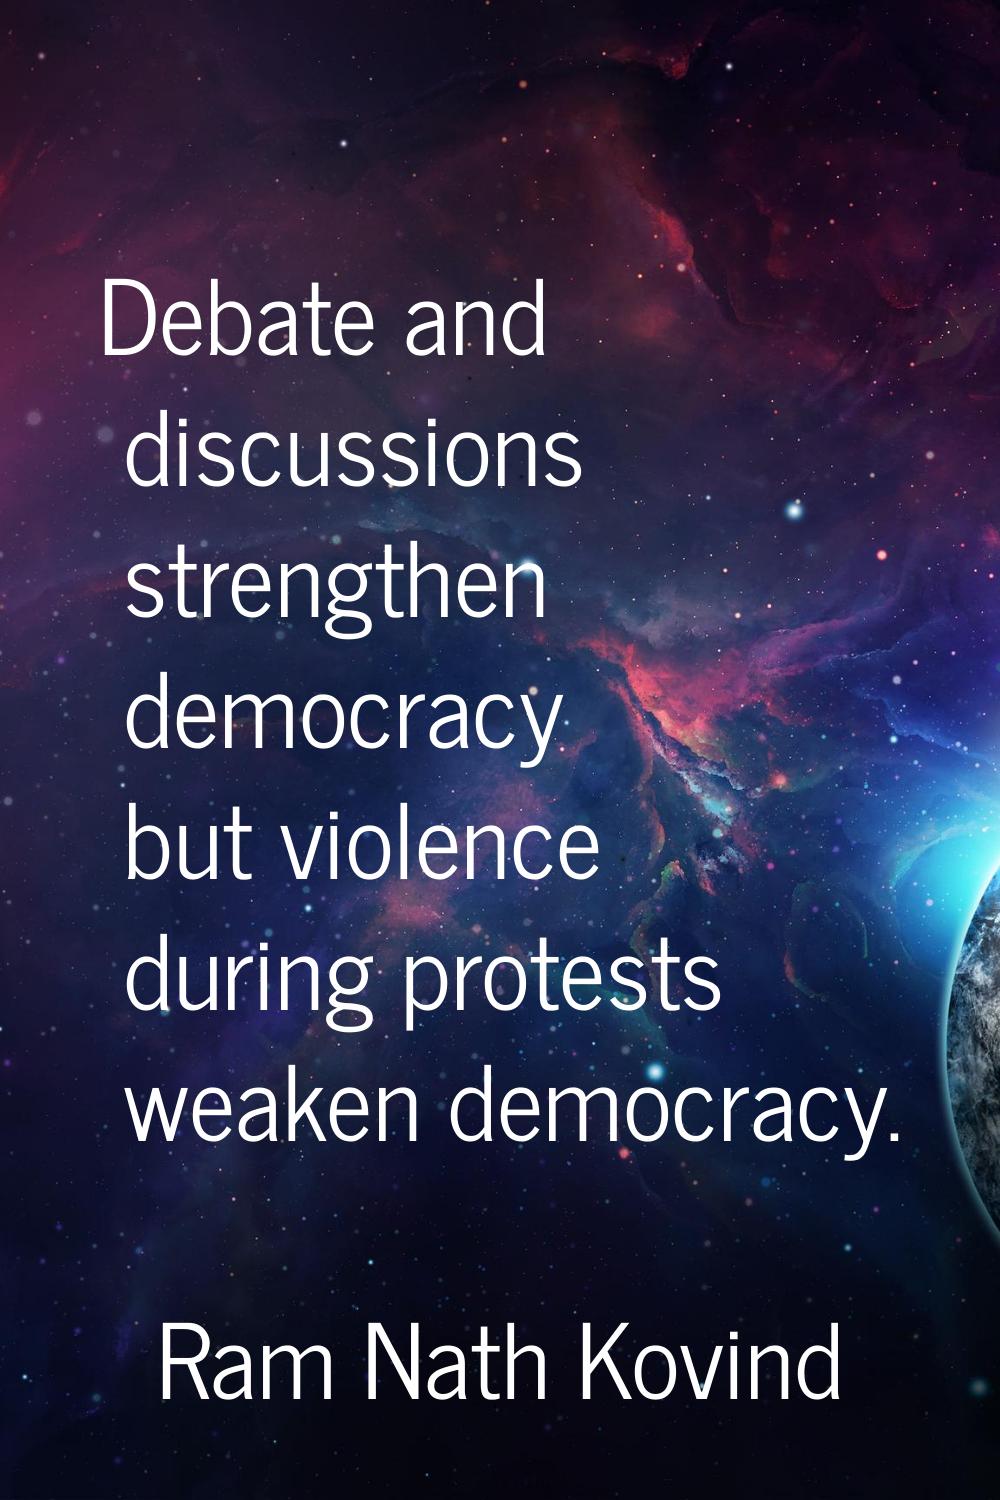 Debate and discussions strengthen democracy but violence during protests weaken democracy.